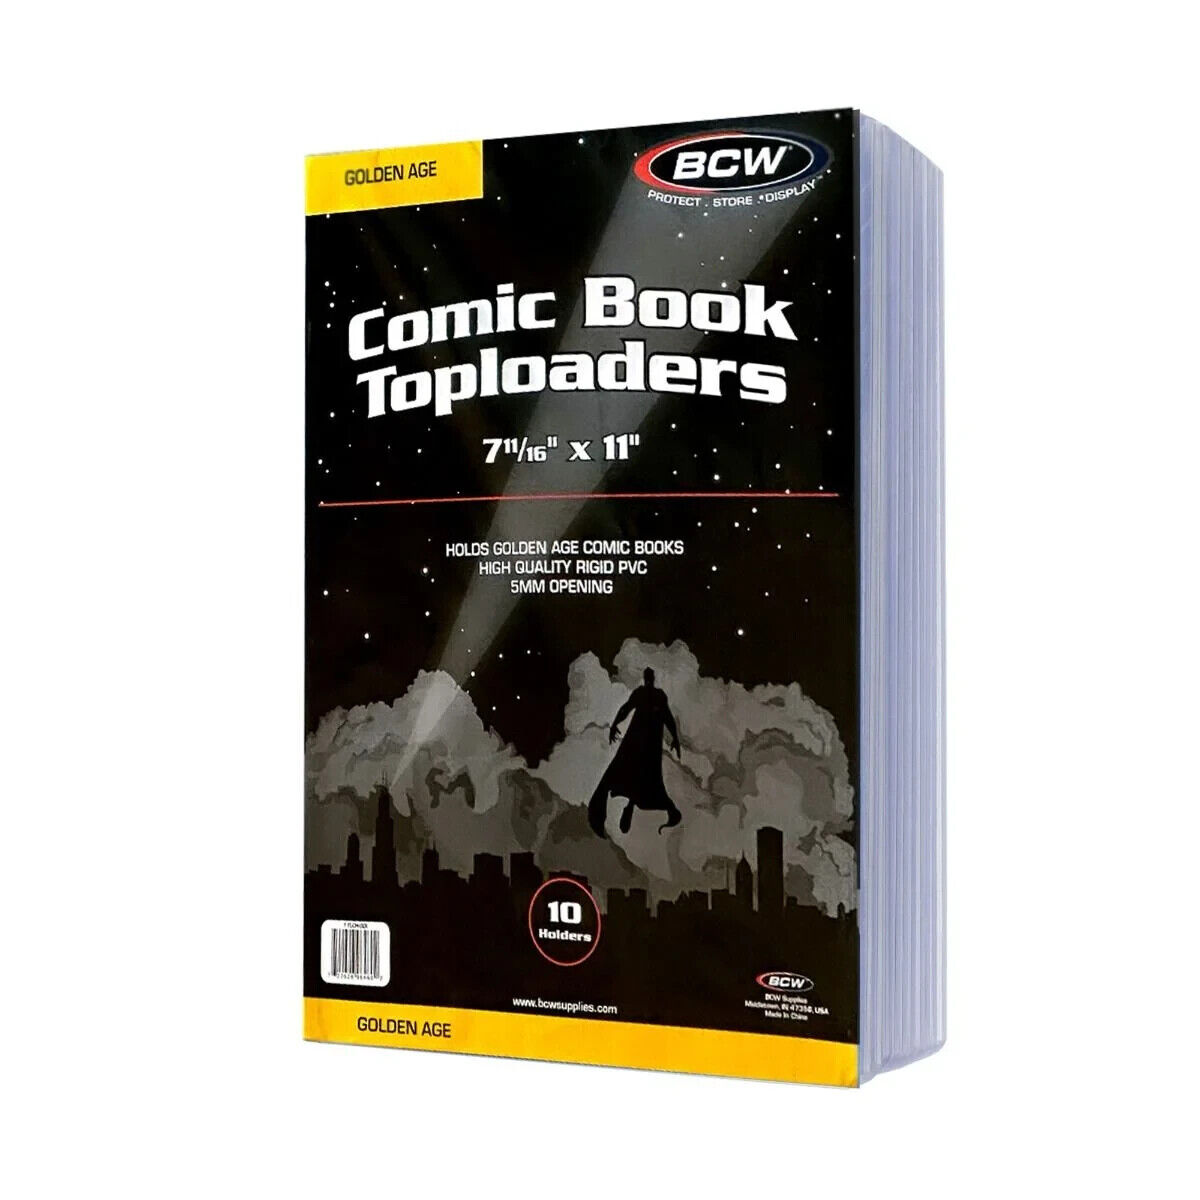 200 BCW Golden Age Comic Book Topload Holders Hard Plastic protector sleeve